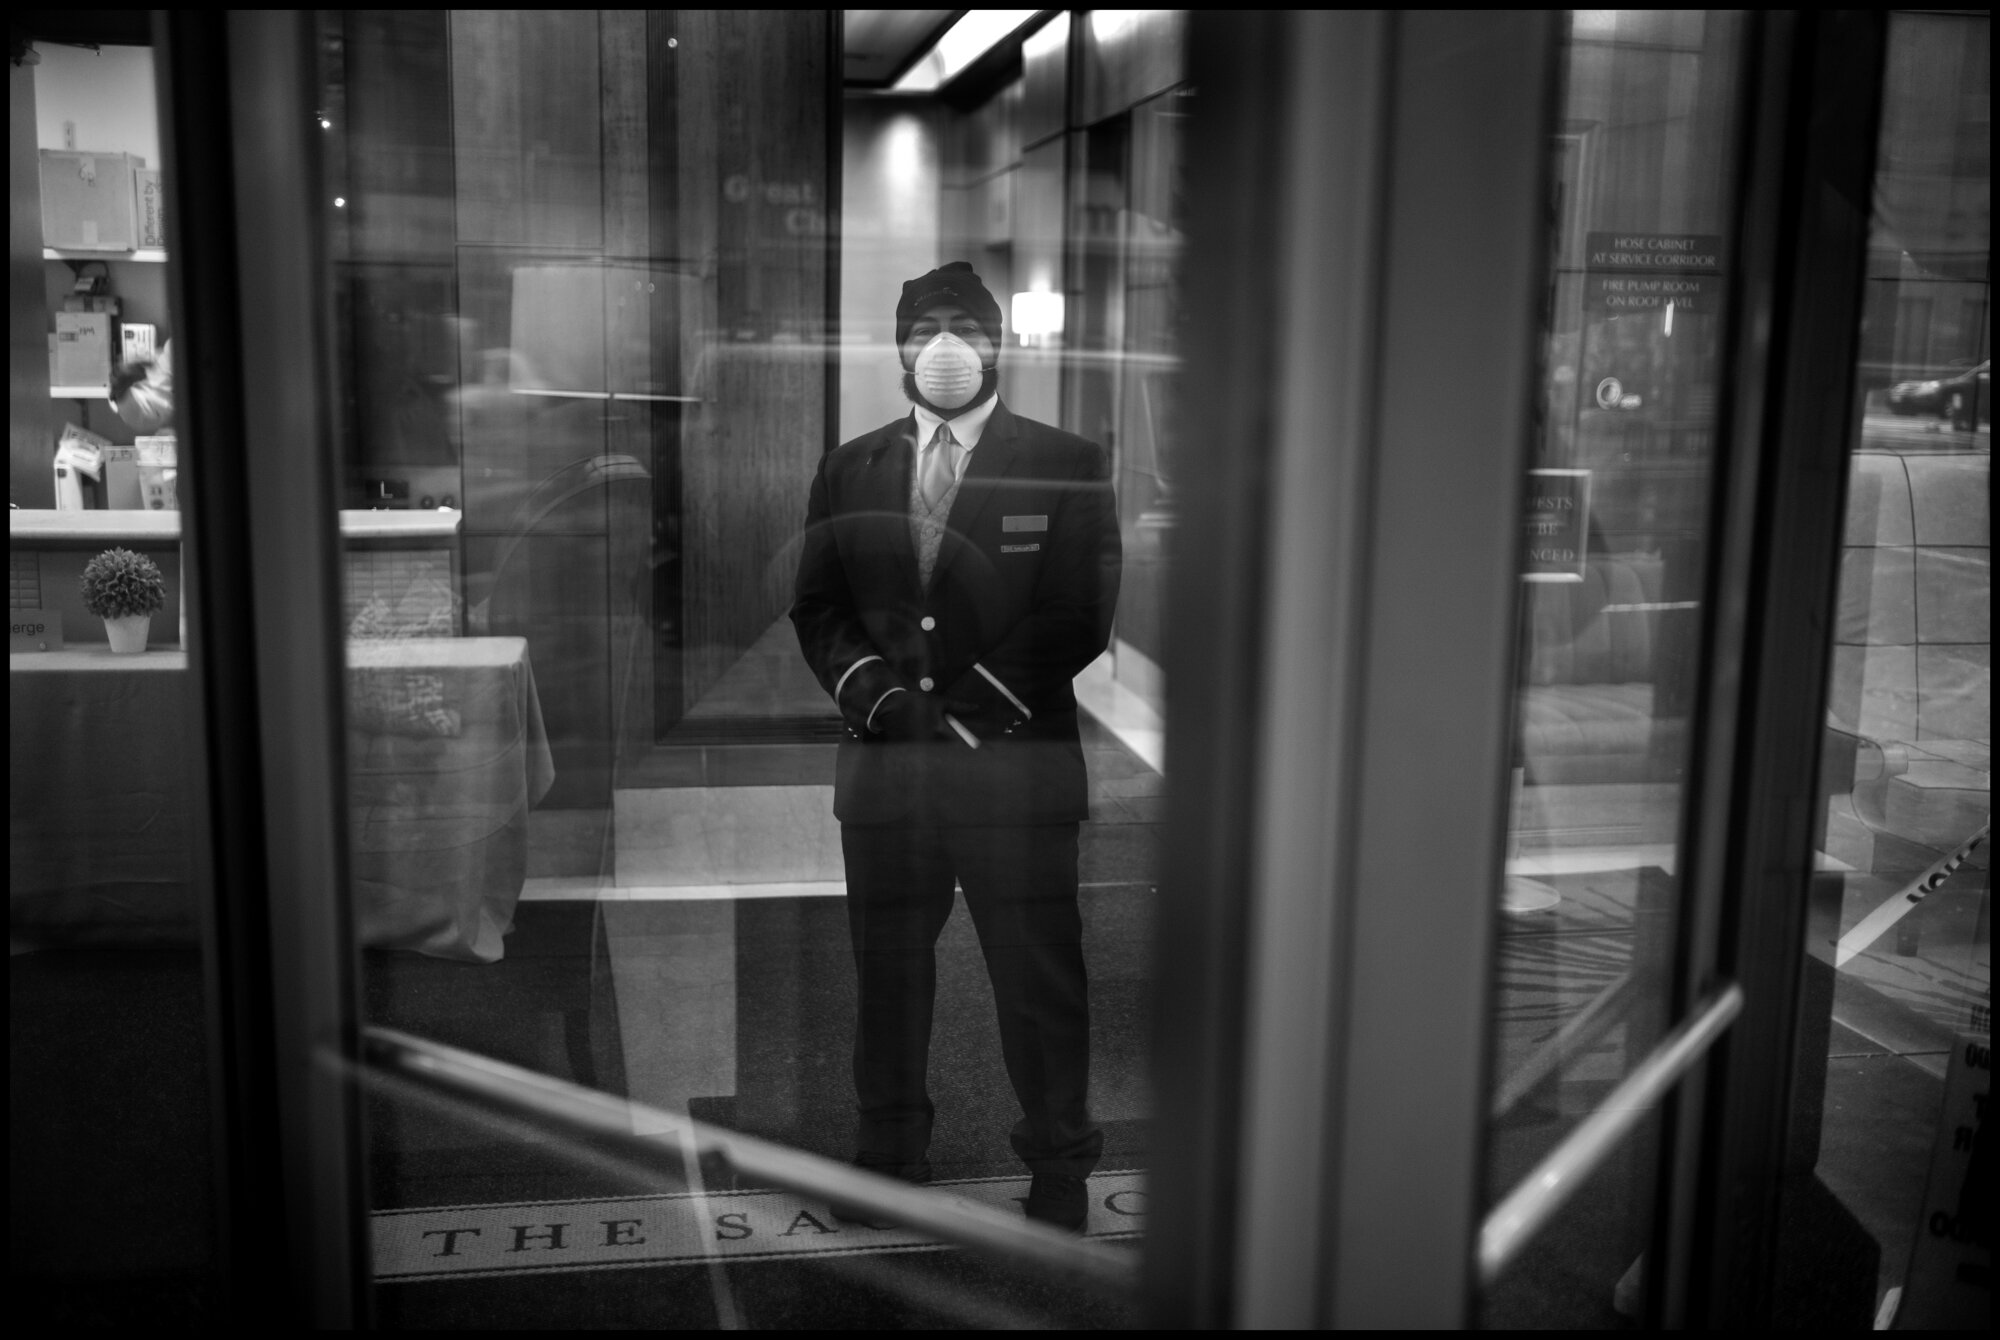  A doorman stands proudly with his uniform and protective mask at a building on the Upper Westside.   March 23, 2020. © Peter Turnley.   ID# 02-004 